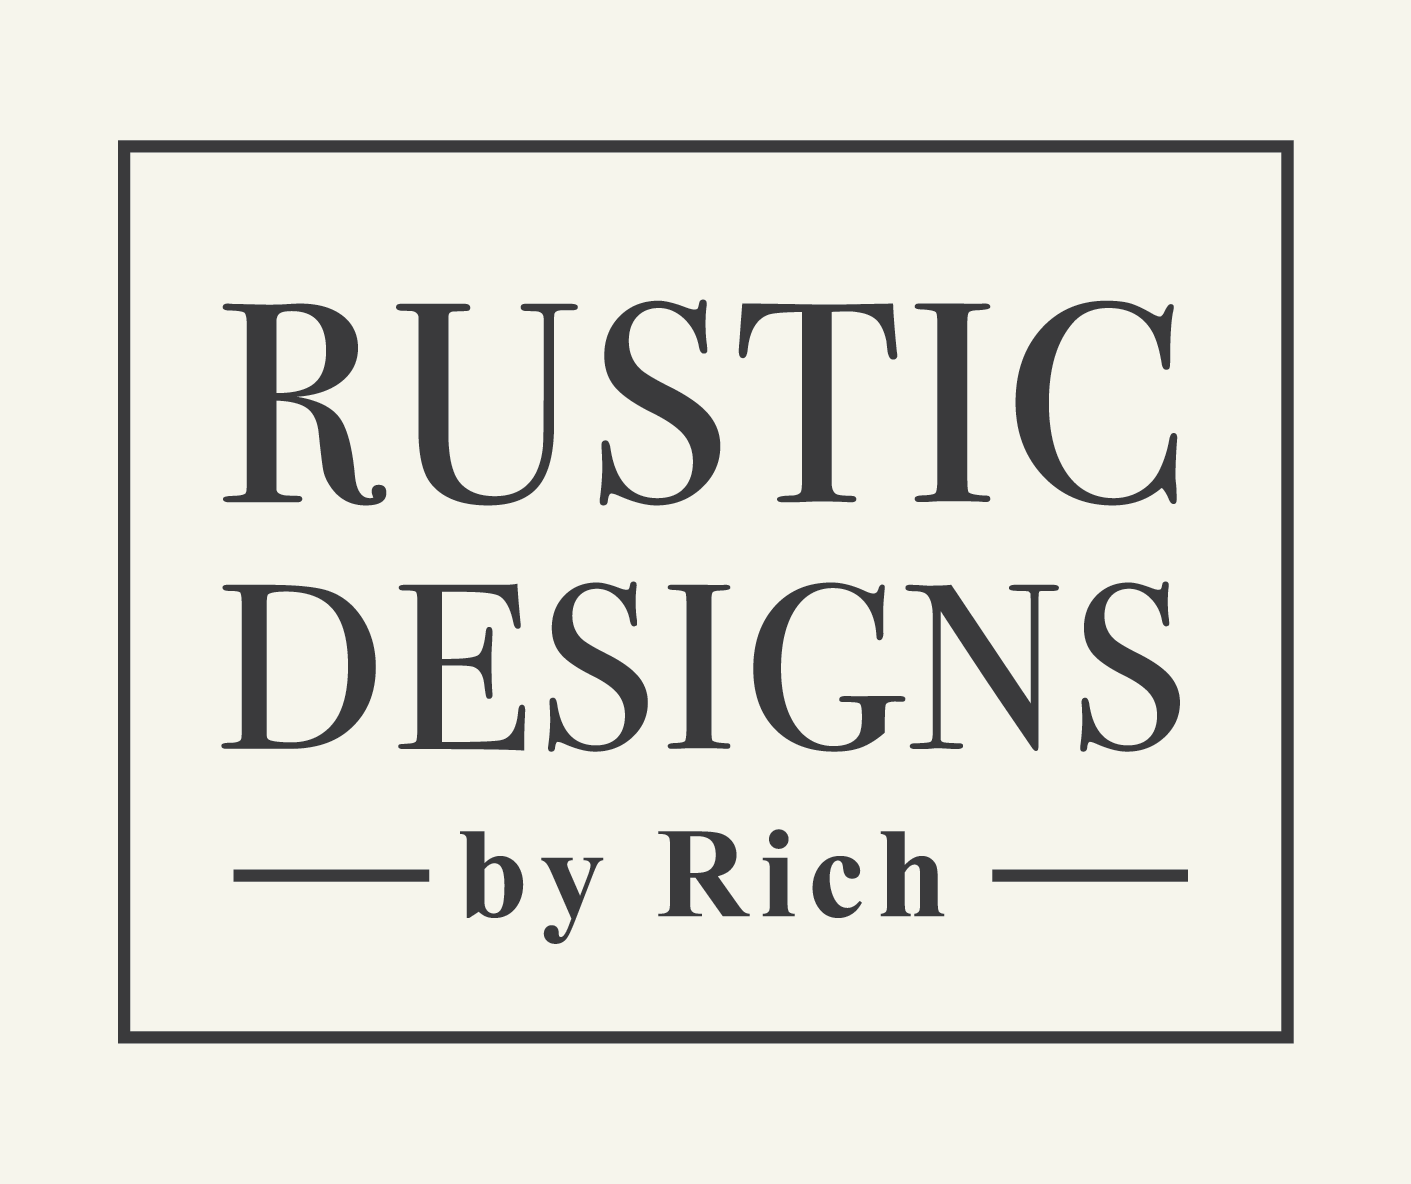 Charcuterie Logo - Rustic Designs by Rich | Charcuterie Boards, River Tables, Custom Wood